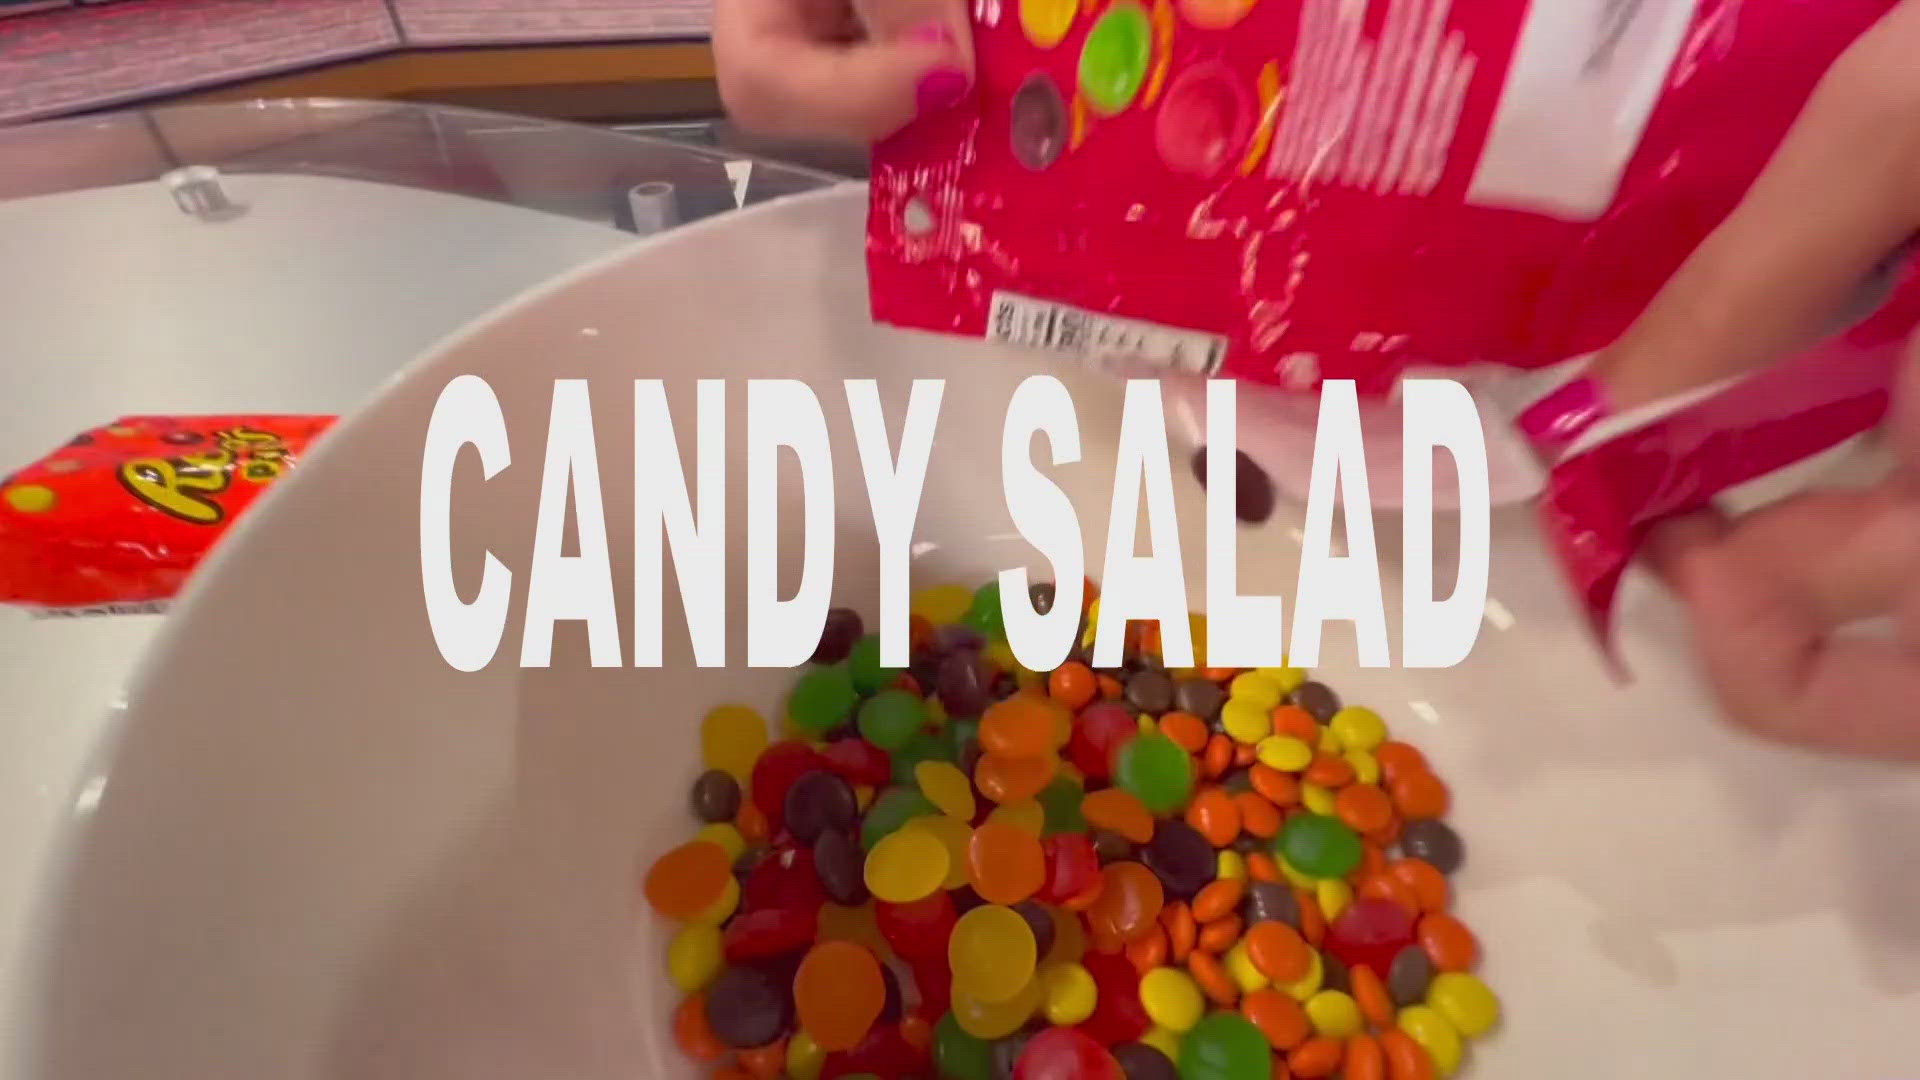 WWL Louisiana's Leslie Spoon and the Morning News crew has Candy Salad in today's Trending News.